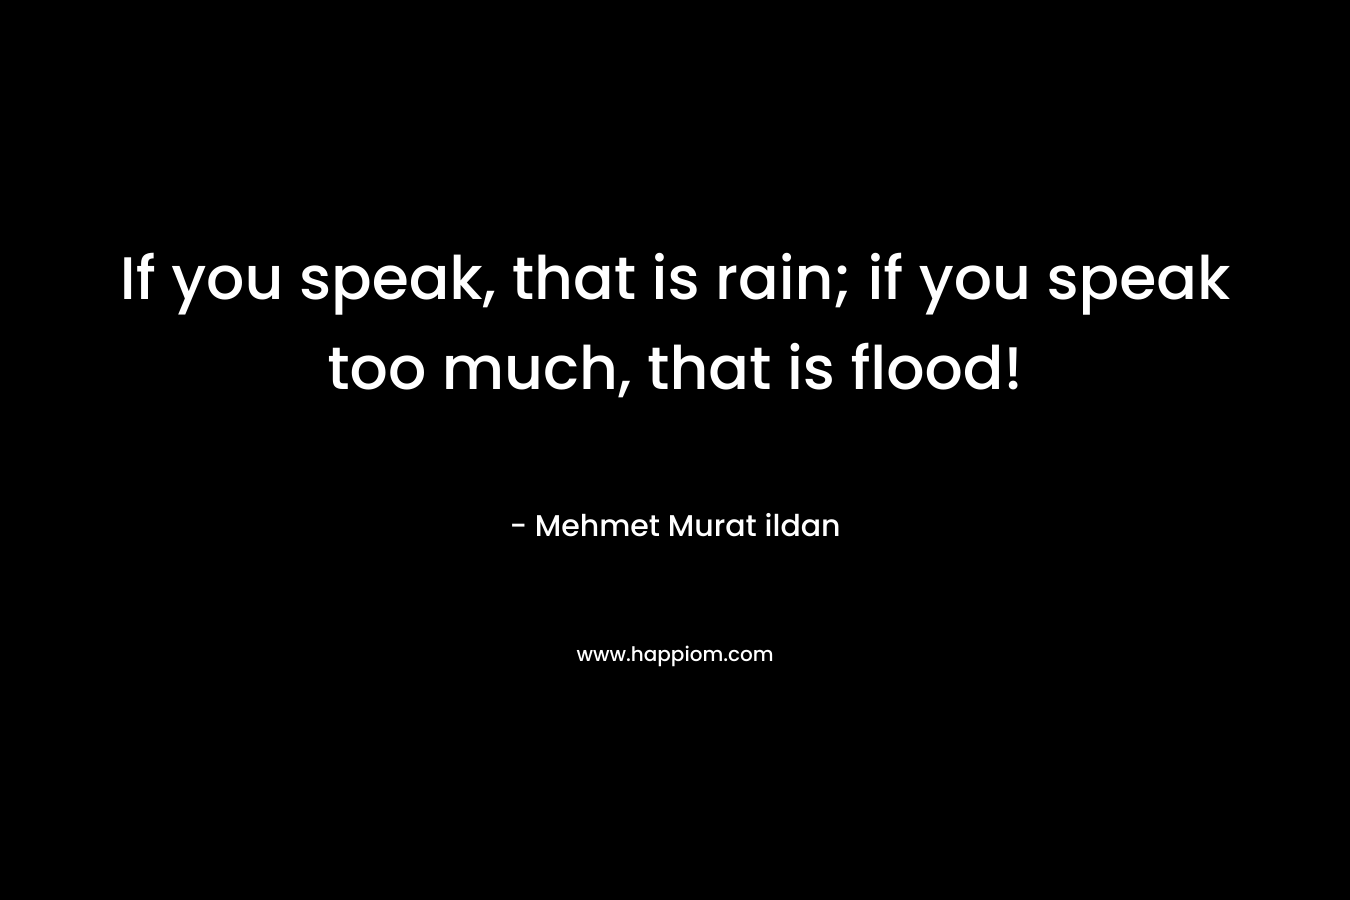 If you speak, that is rain; if you speak too much, that is flood!